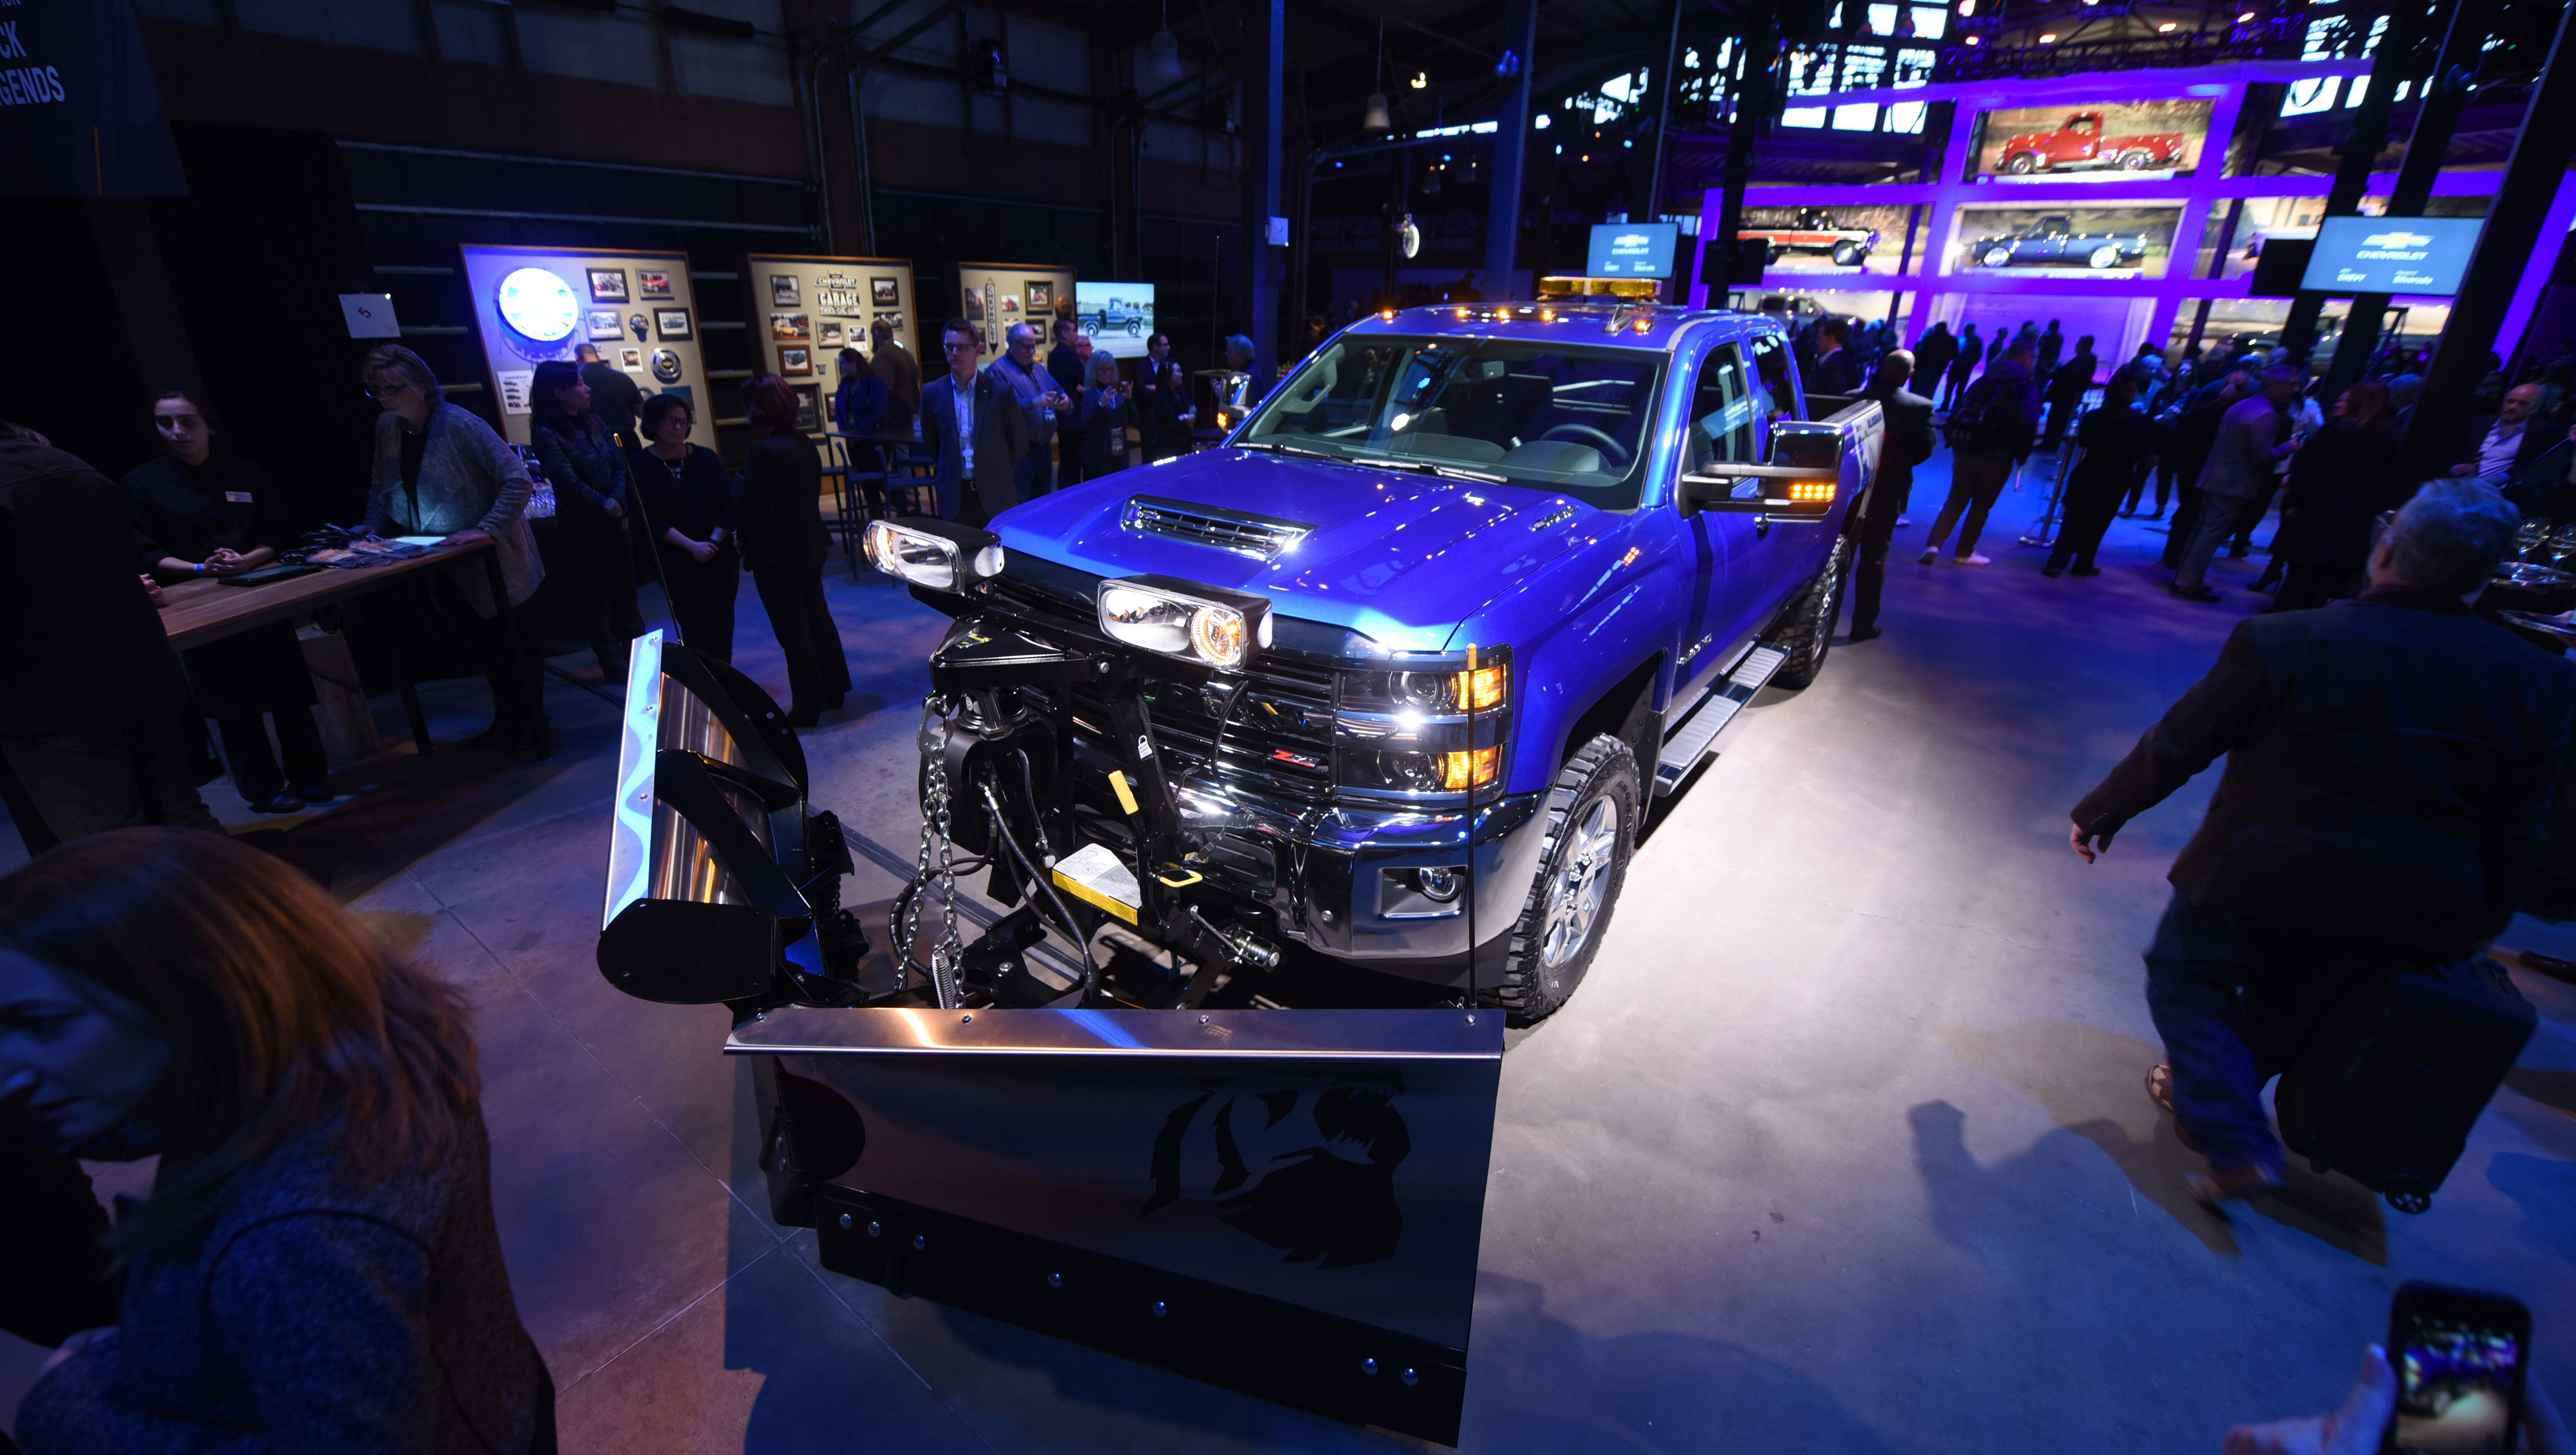 The 2017 Chevy Silverado Alaskan edition truck built for SEMA also was on display at  Eastern Market's Shed 3.